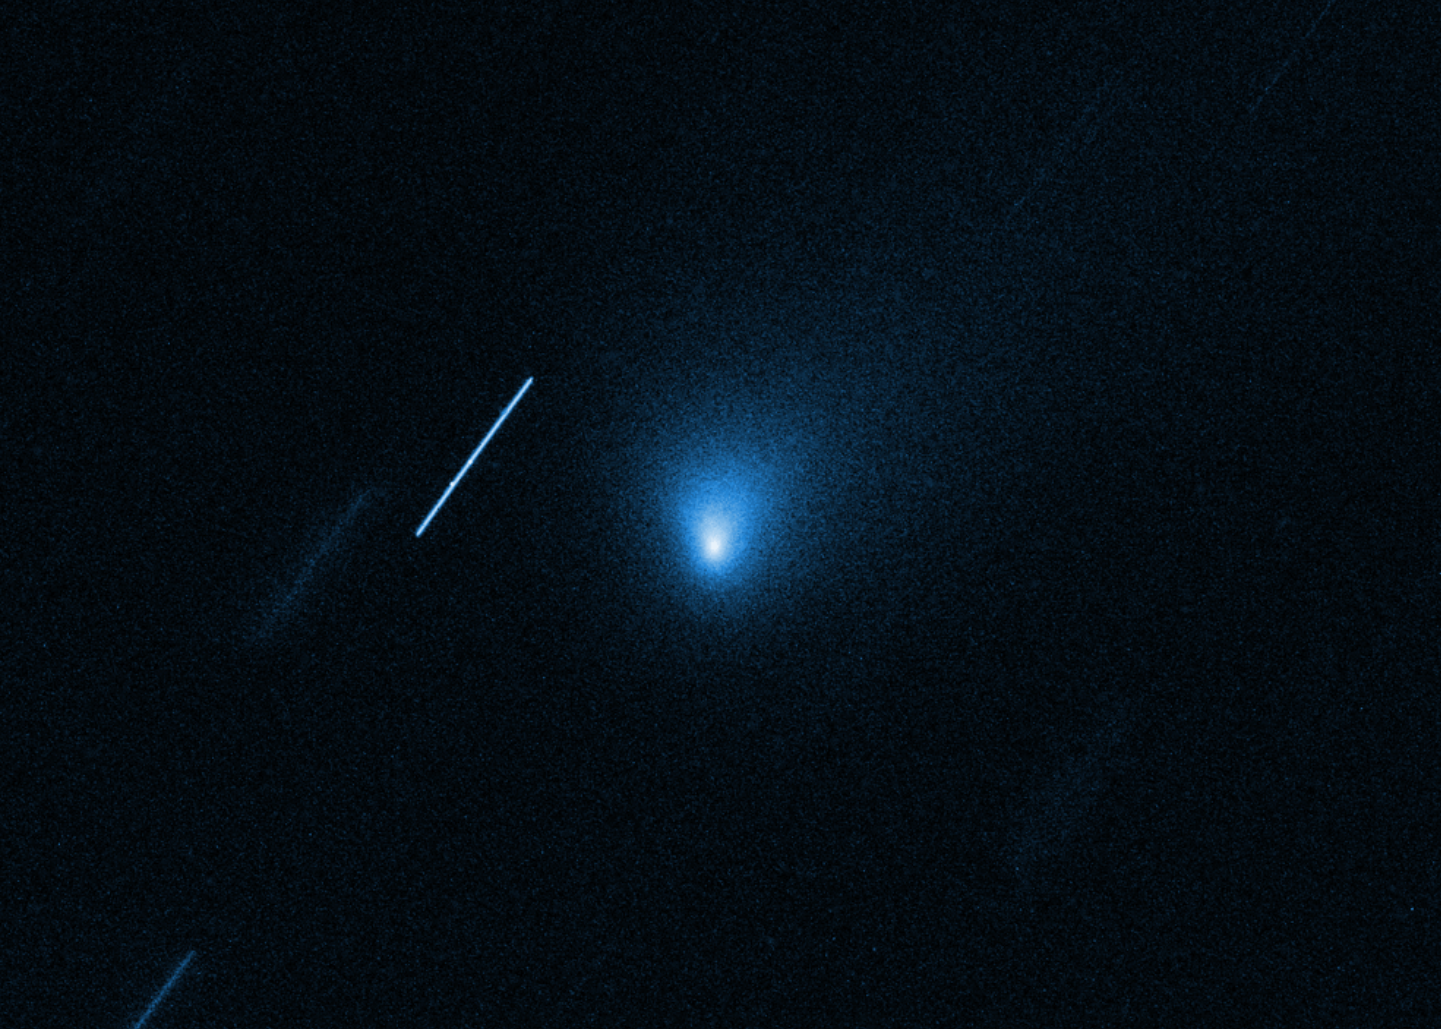 NASA Captured Stunning New Images of the Interstellar Comet in Our Solar System